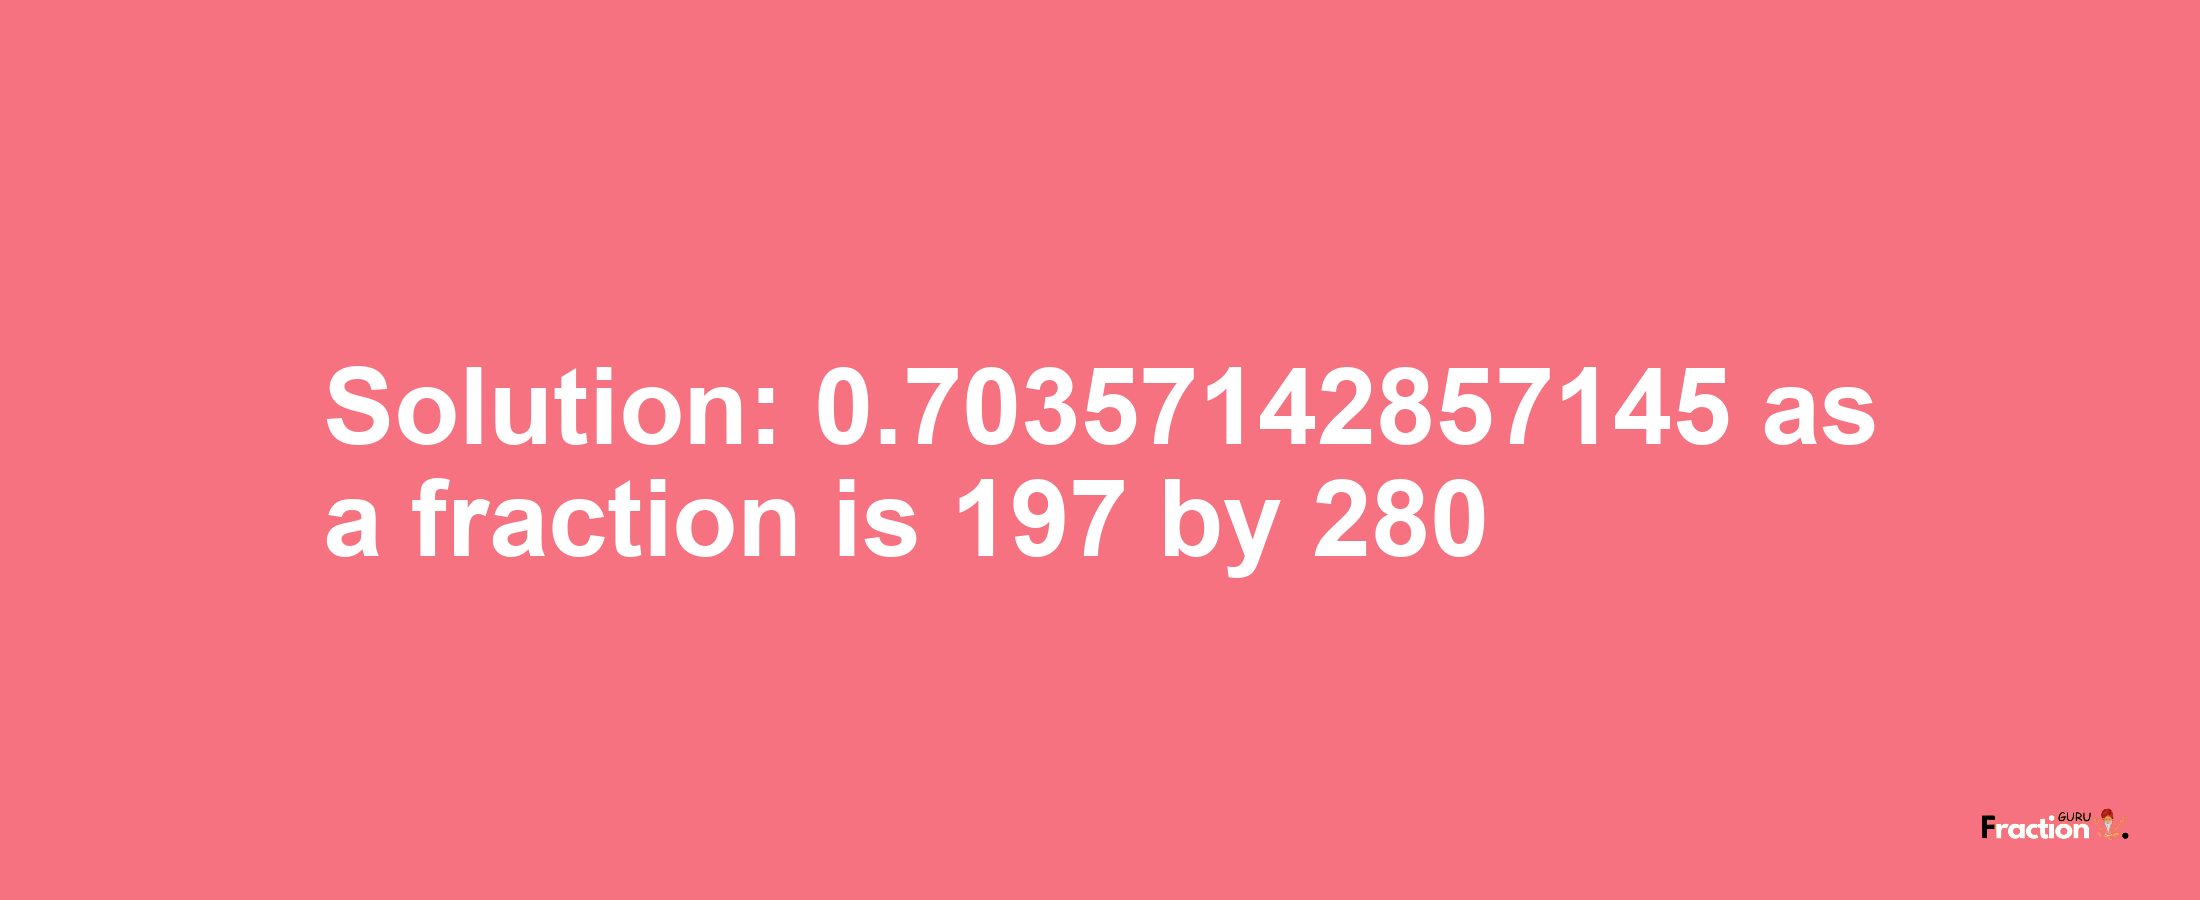 Solution:0.70357142857145 as a fraction is 197/280